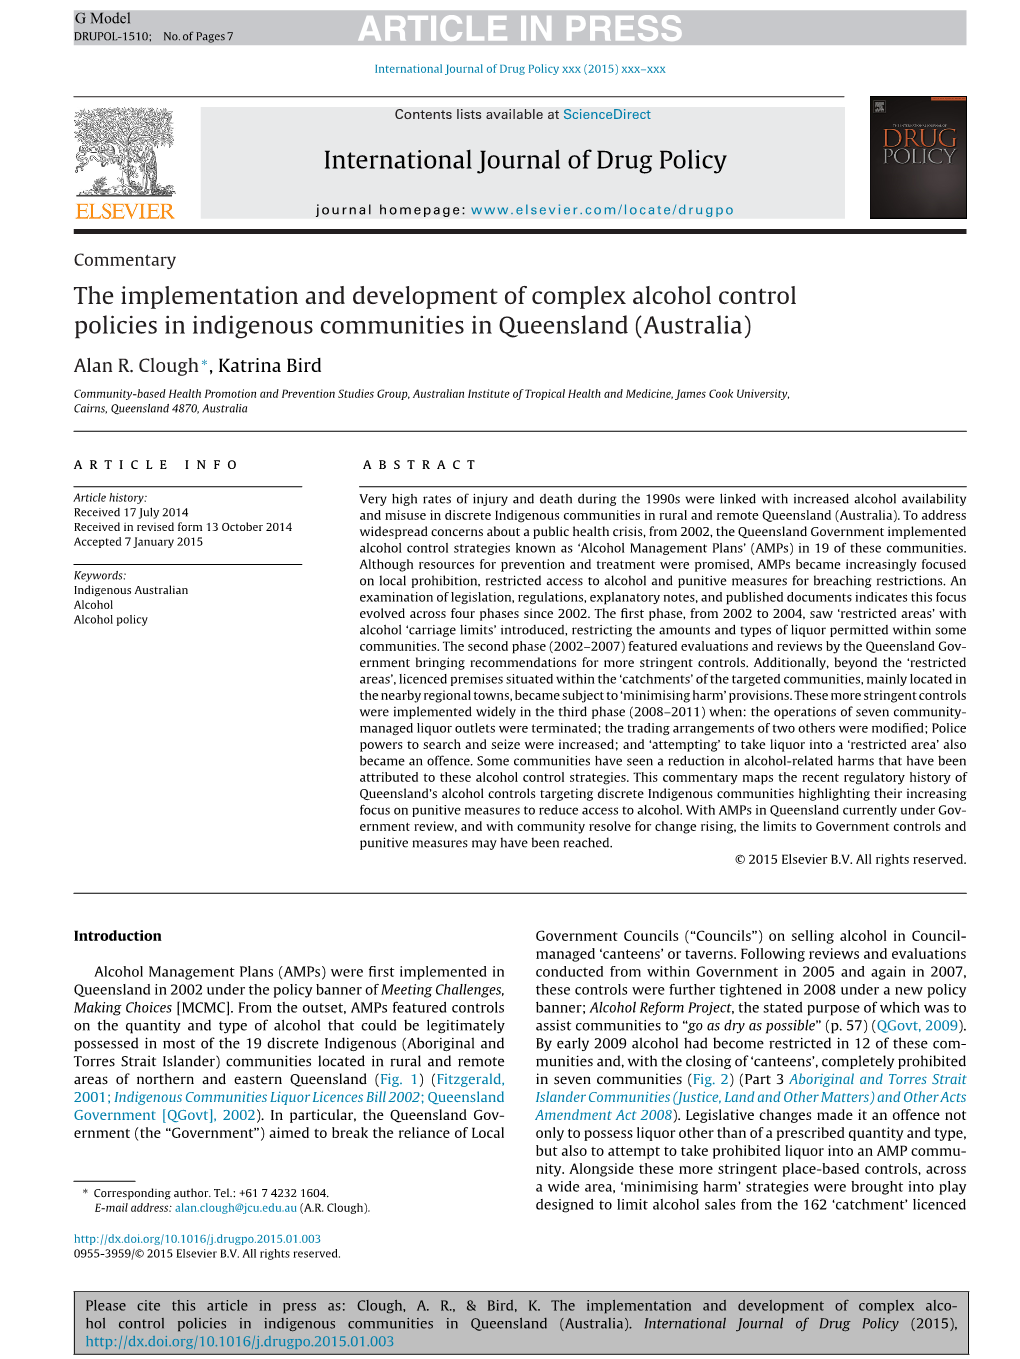 The Implementation and Development of Complex Alcohol Control